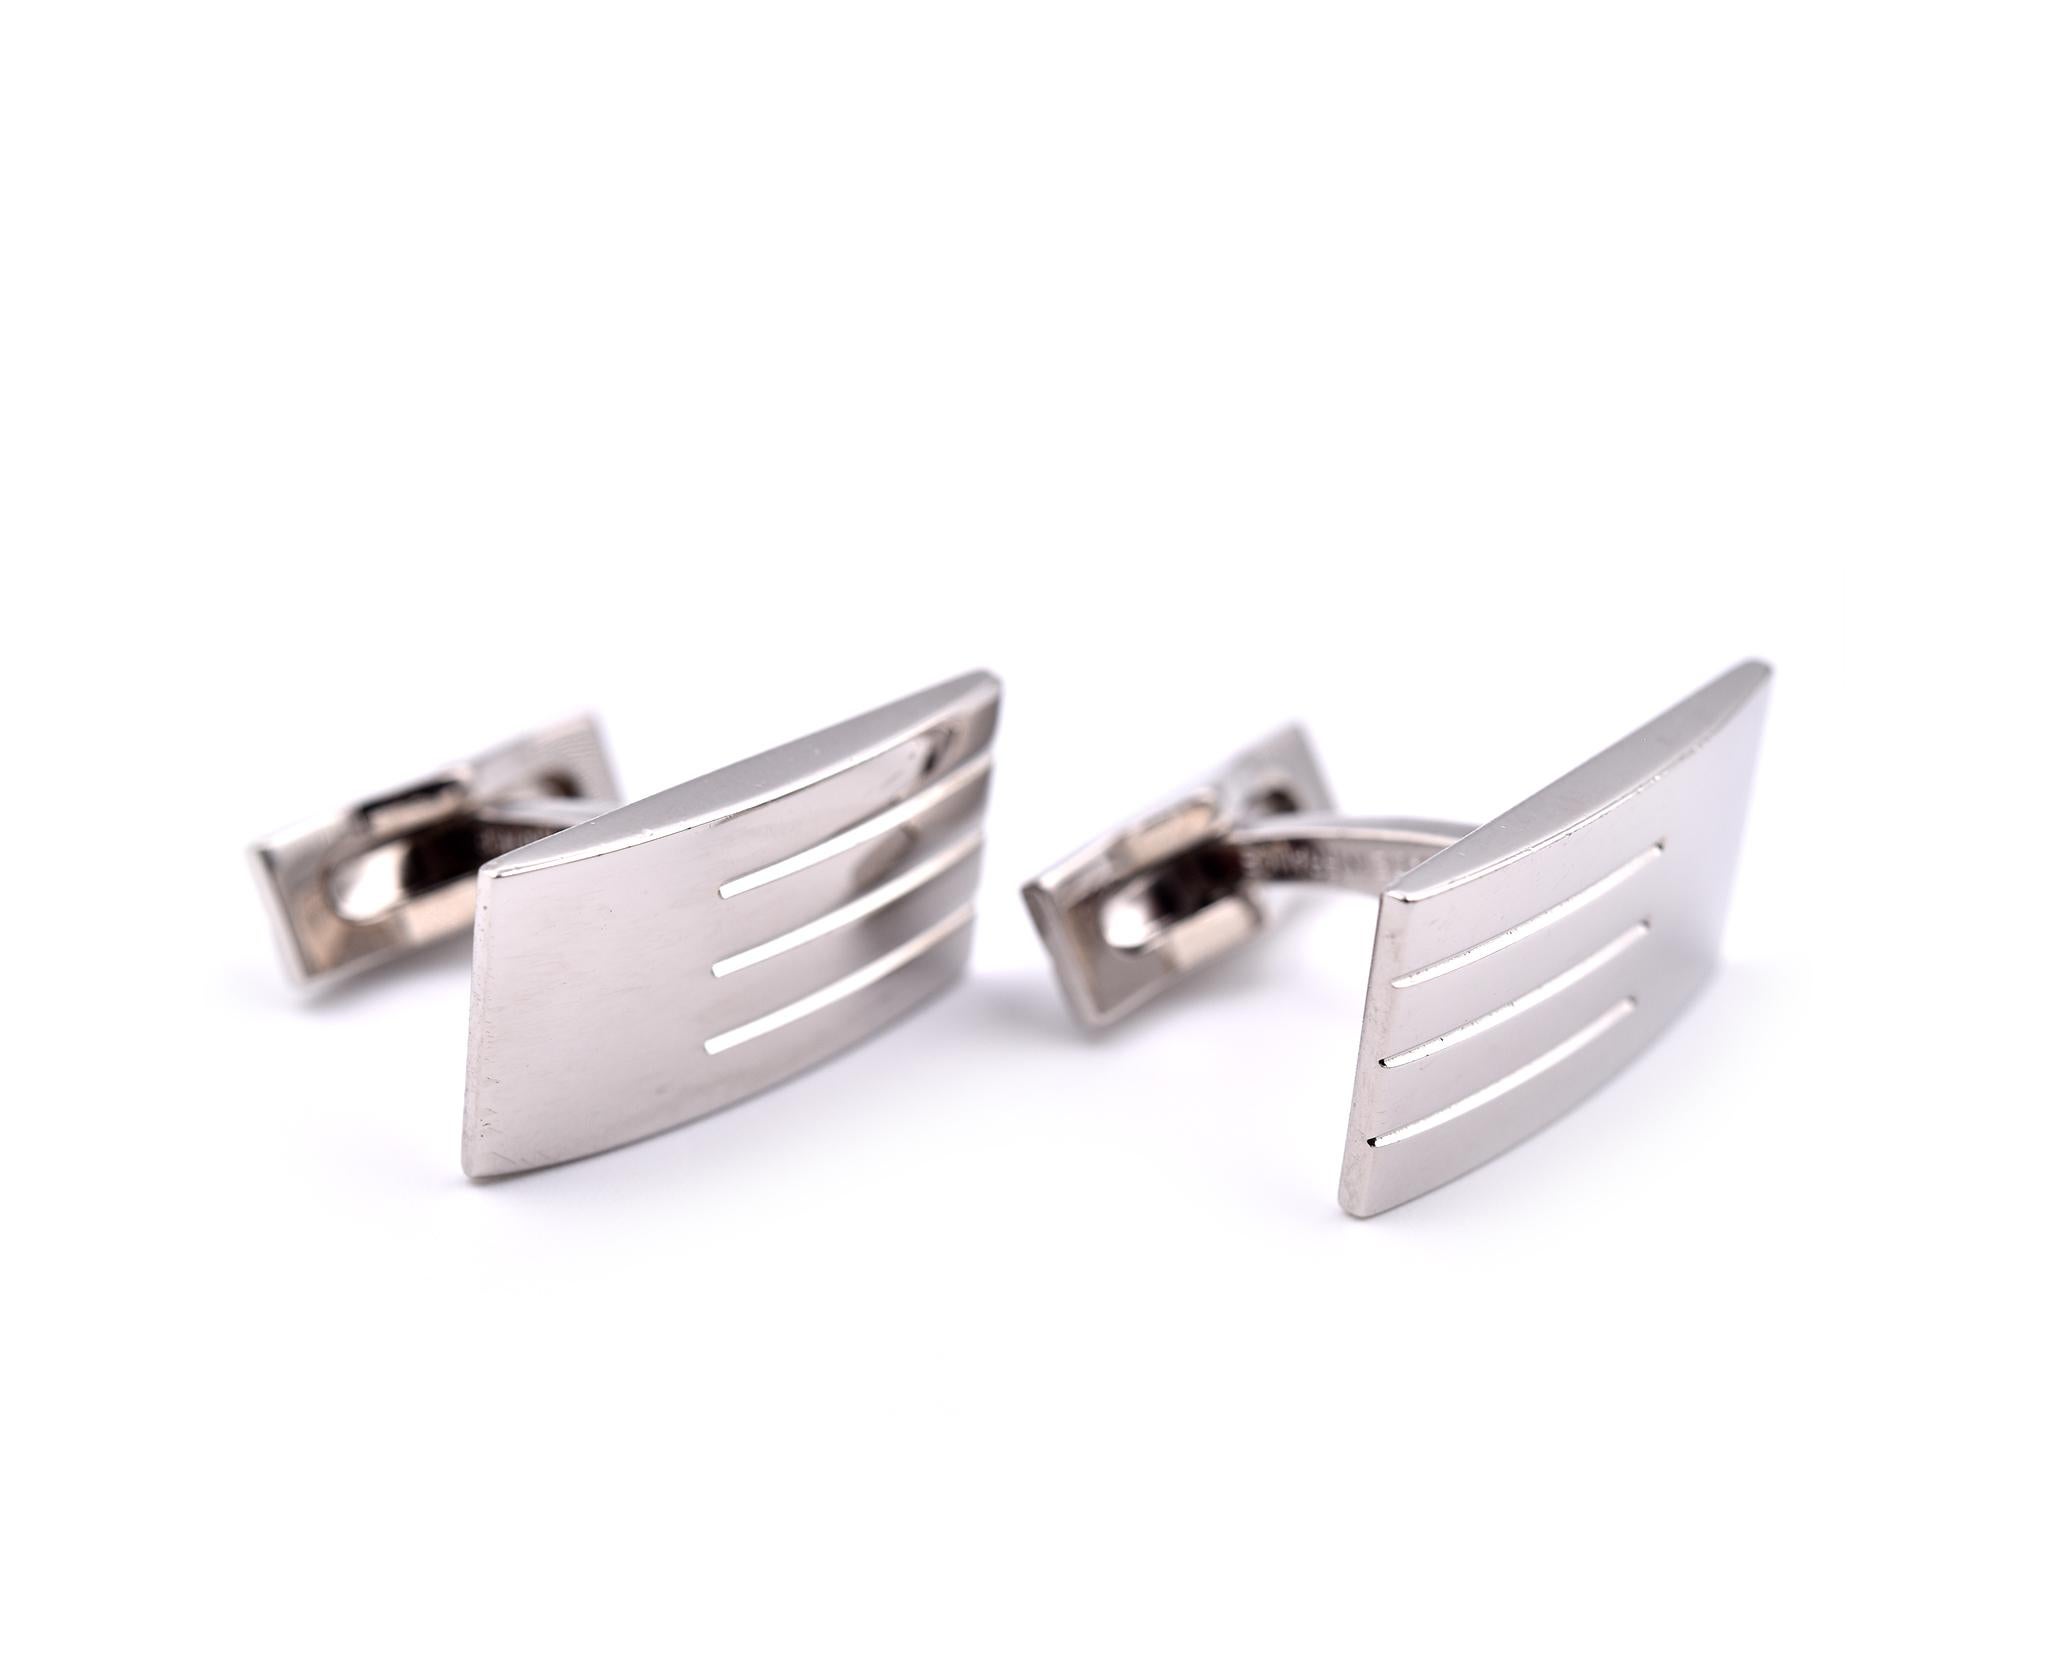 Designer: Dupont
Material: stainless steel
Dimensions: cufflinks measure approximately 24mm by 13.09mm
Weight: 17.3 grams
